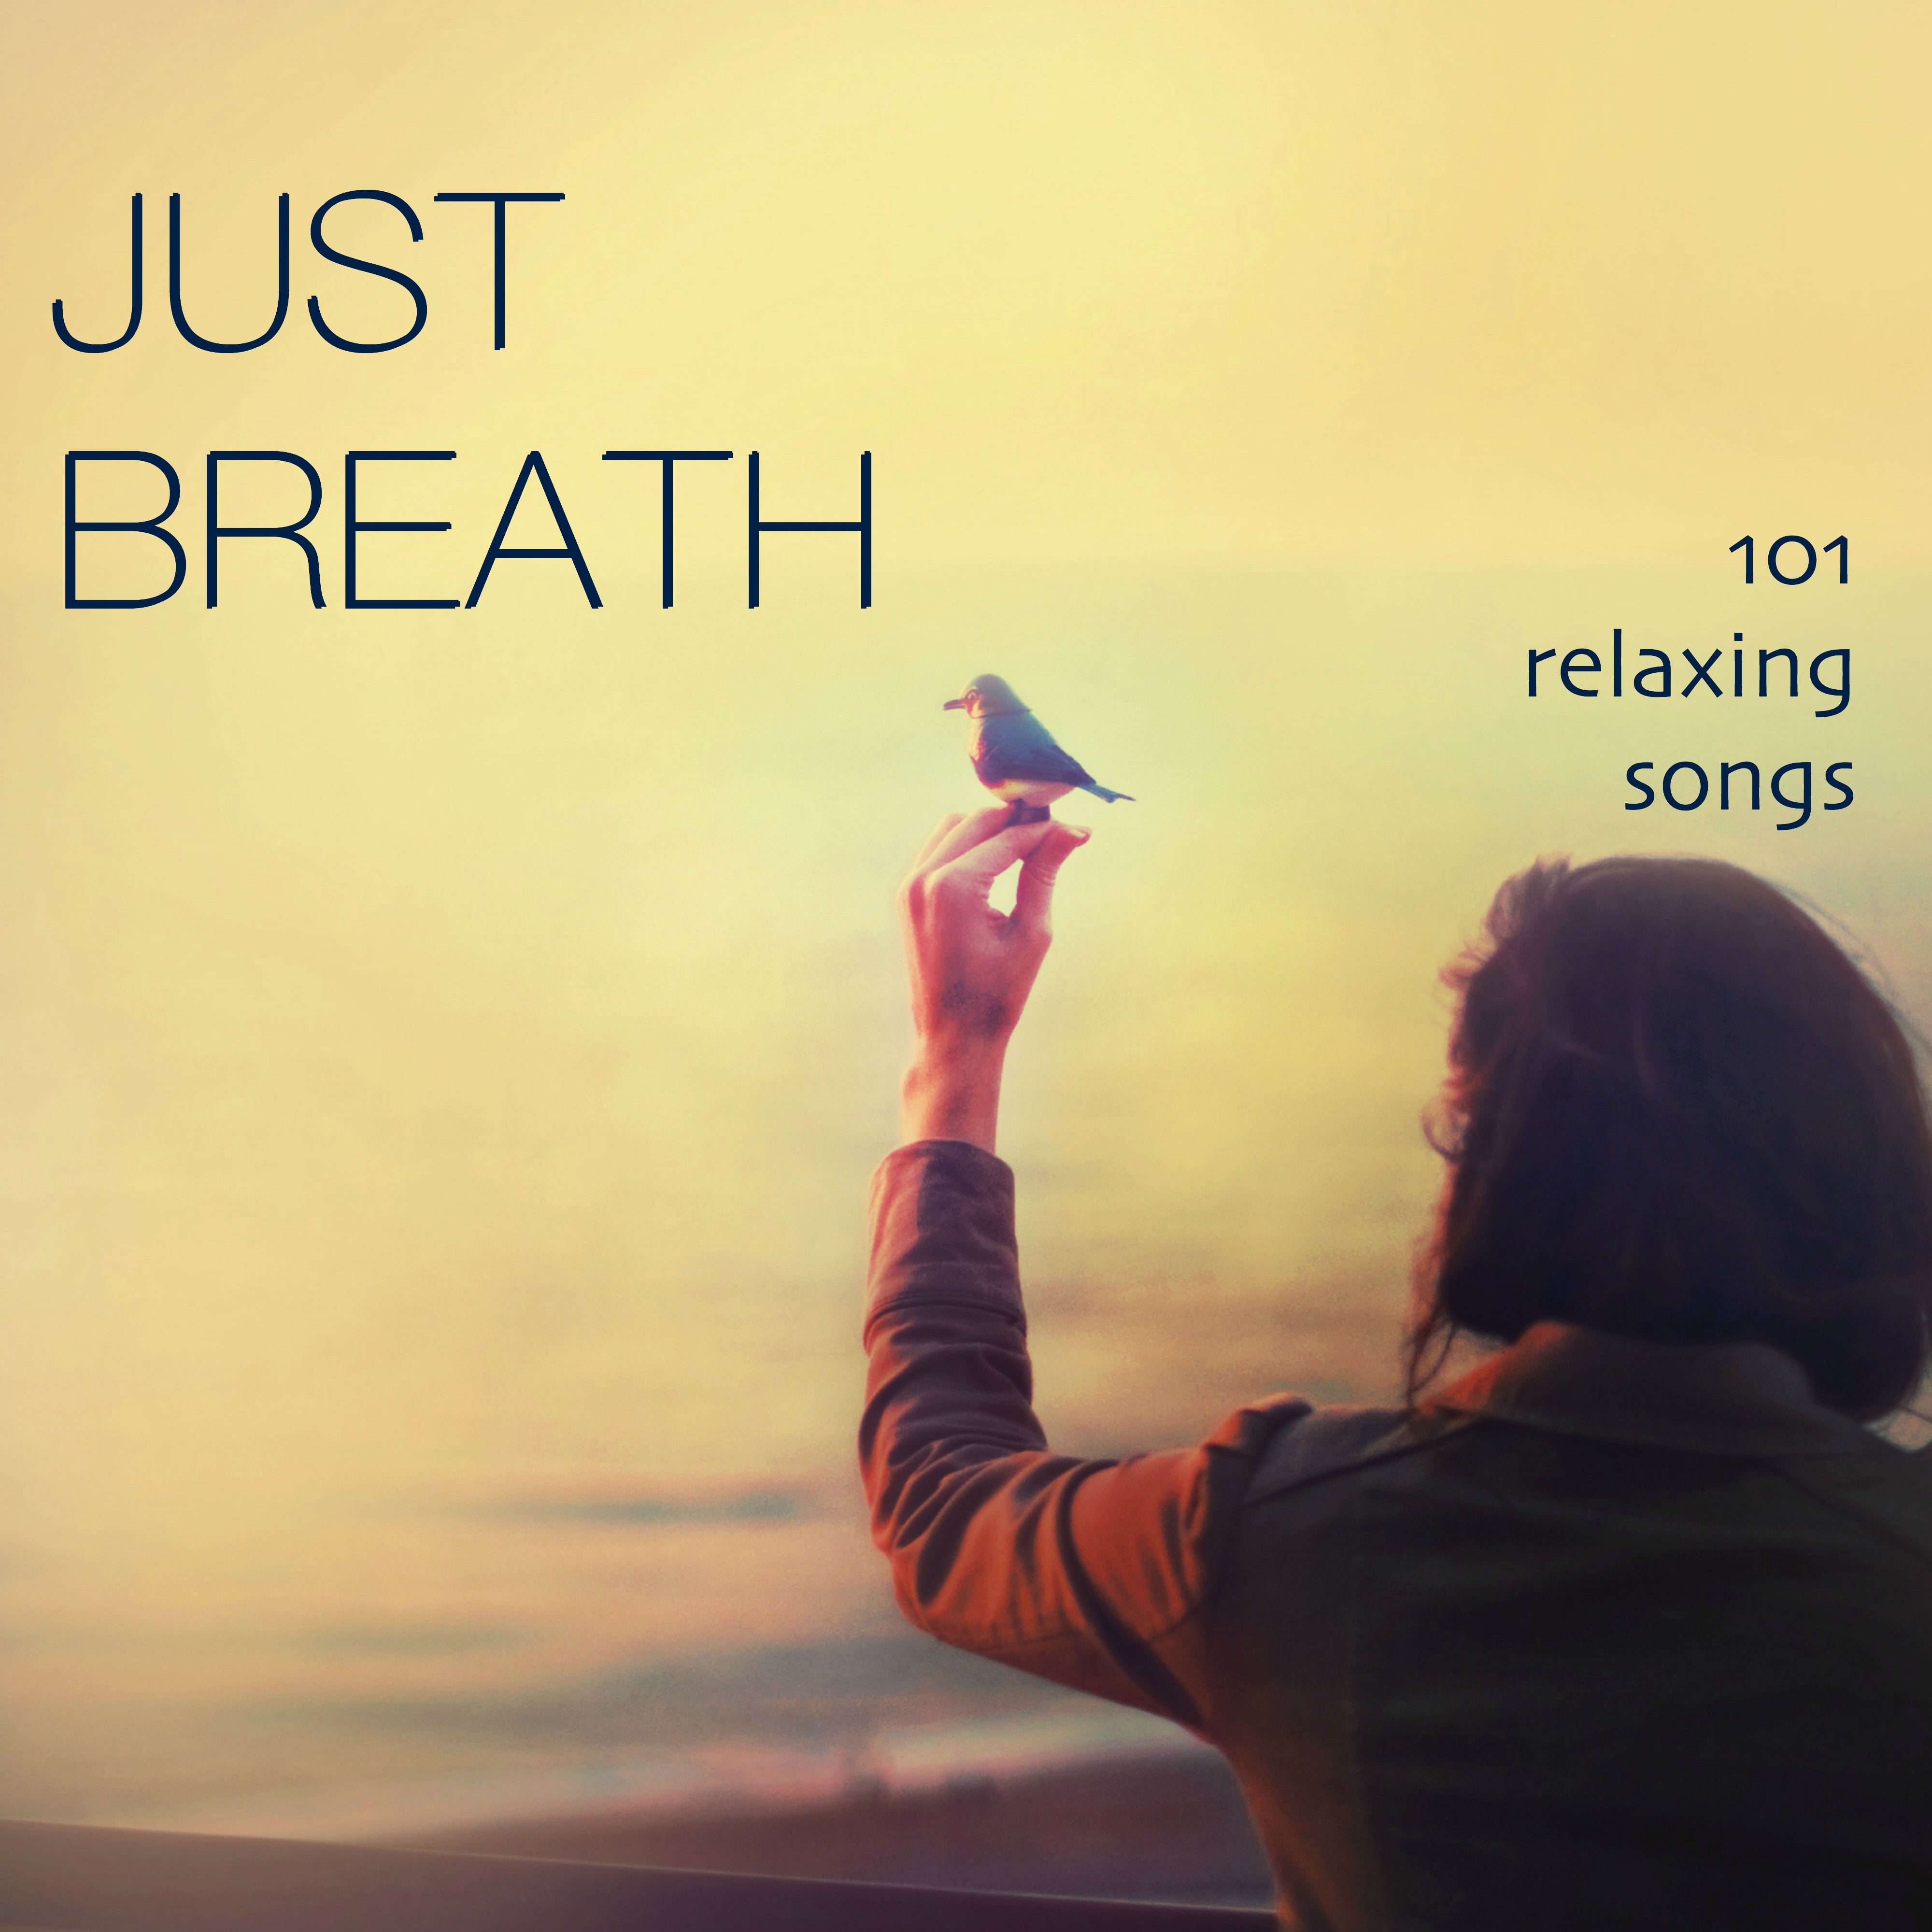 Just Breath - Relaxing Music Sound Therapy with Delta Waves and Isochronic Tones for Wellness, Pure Massage, Yoga for Healing, Mindfulness Meditation, Brain Stimolation, Stress Relief, Spirit Healing